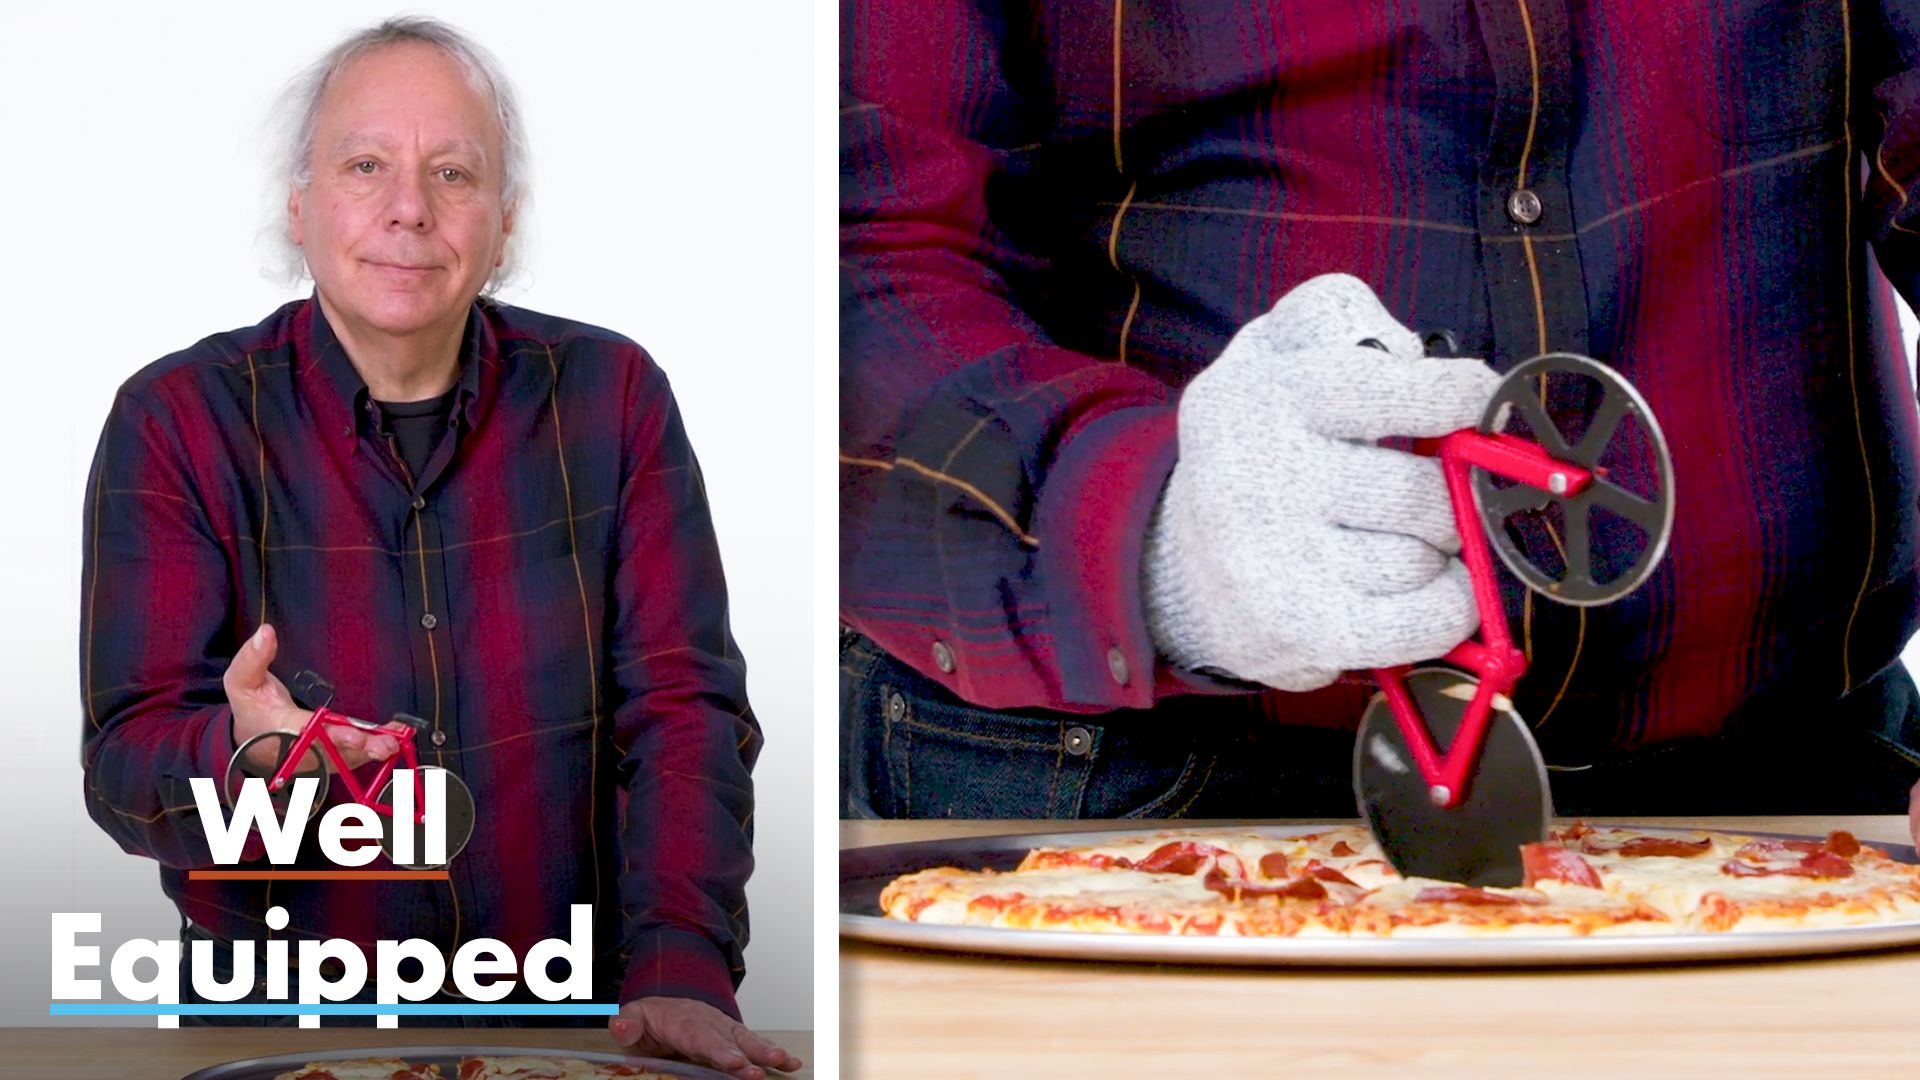 Watch 5 Cheese Gadgets Tested by Design Expert, Well Equipped